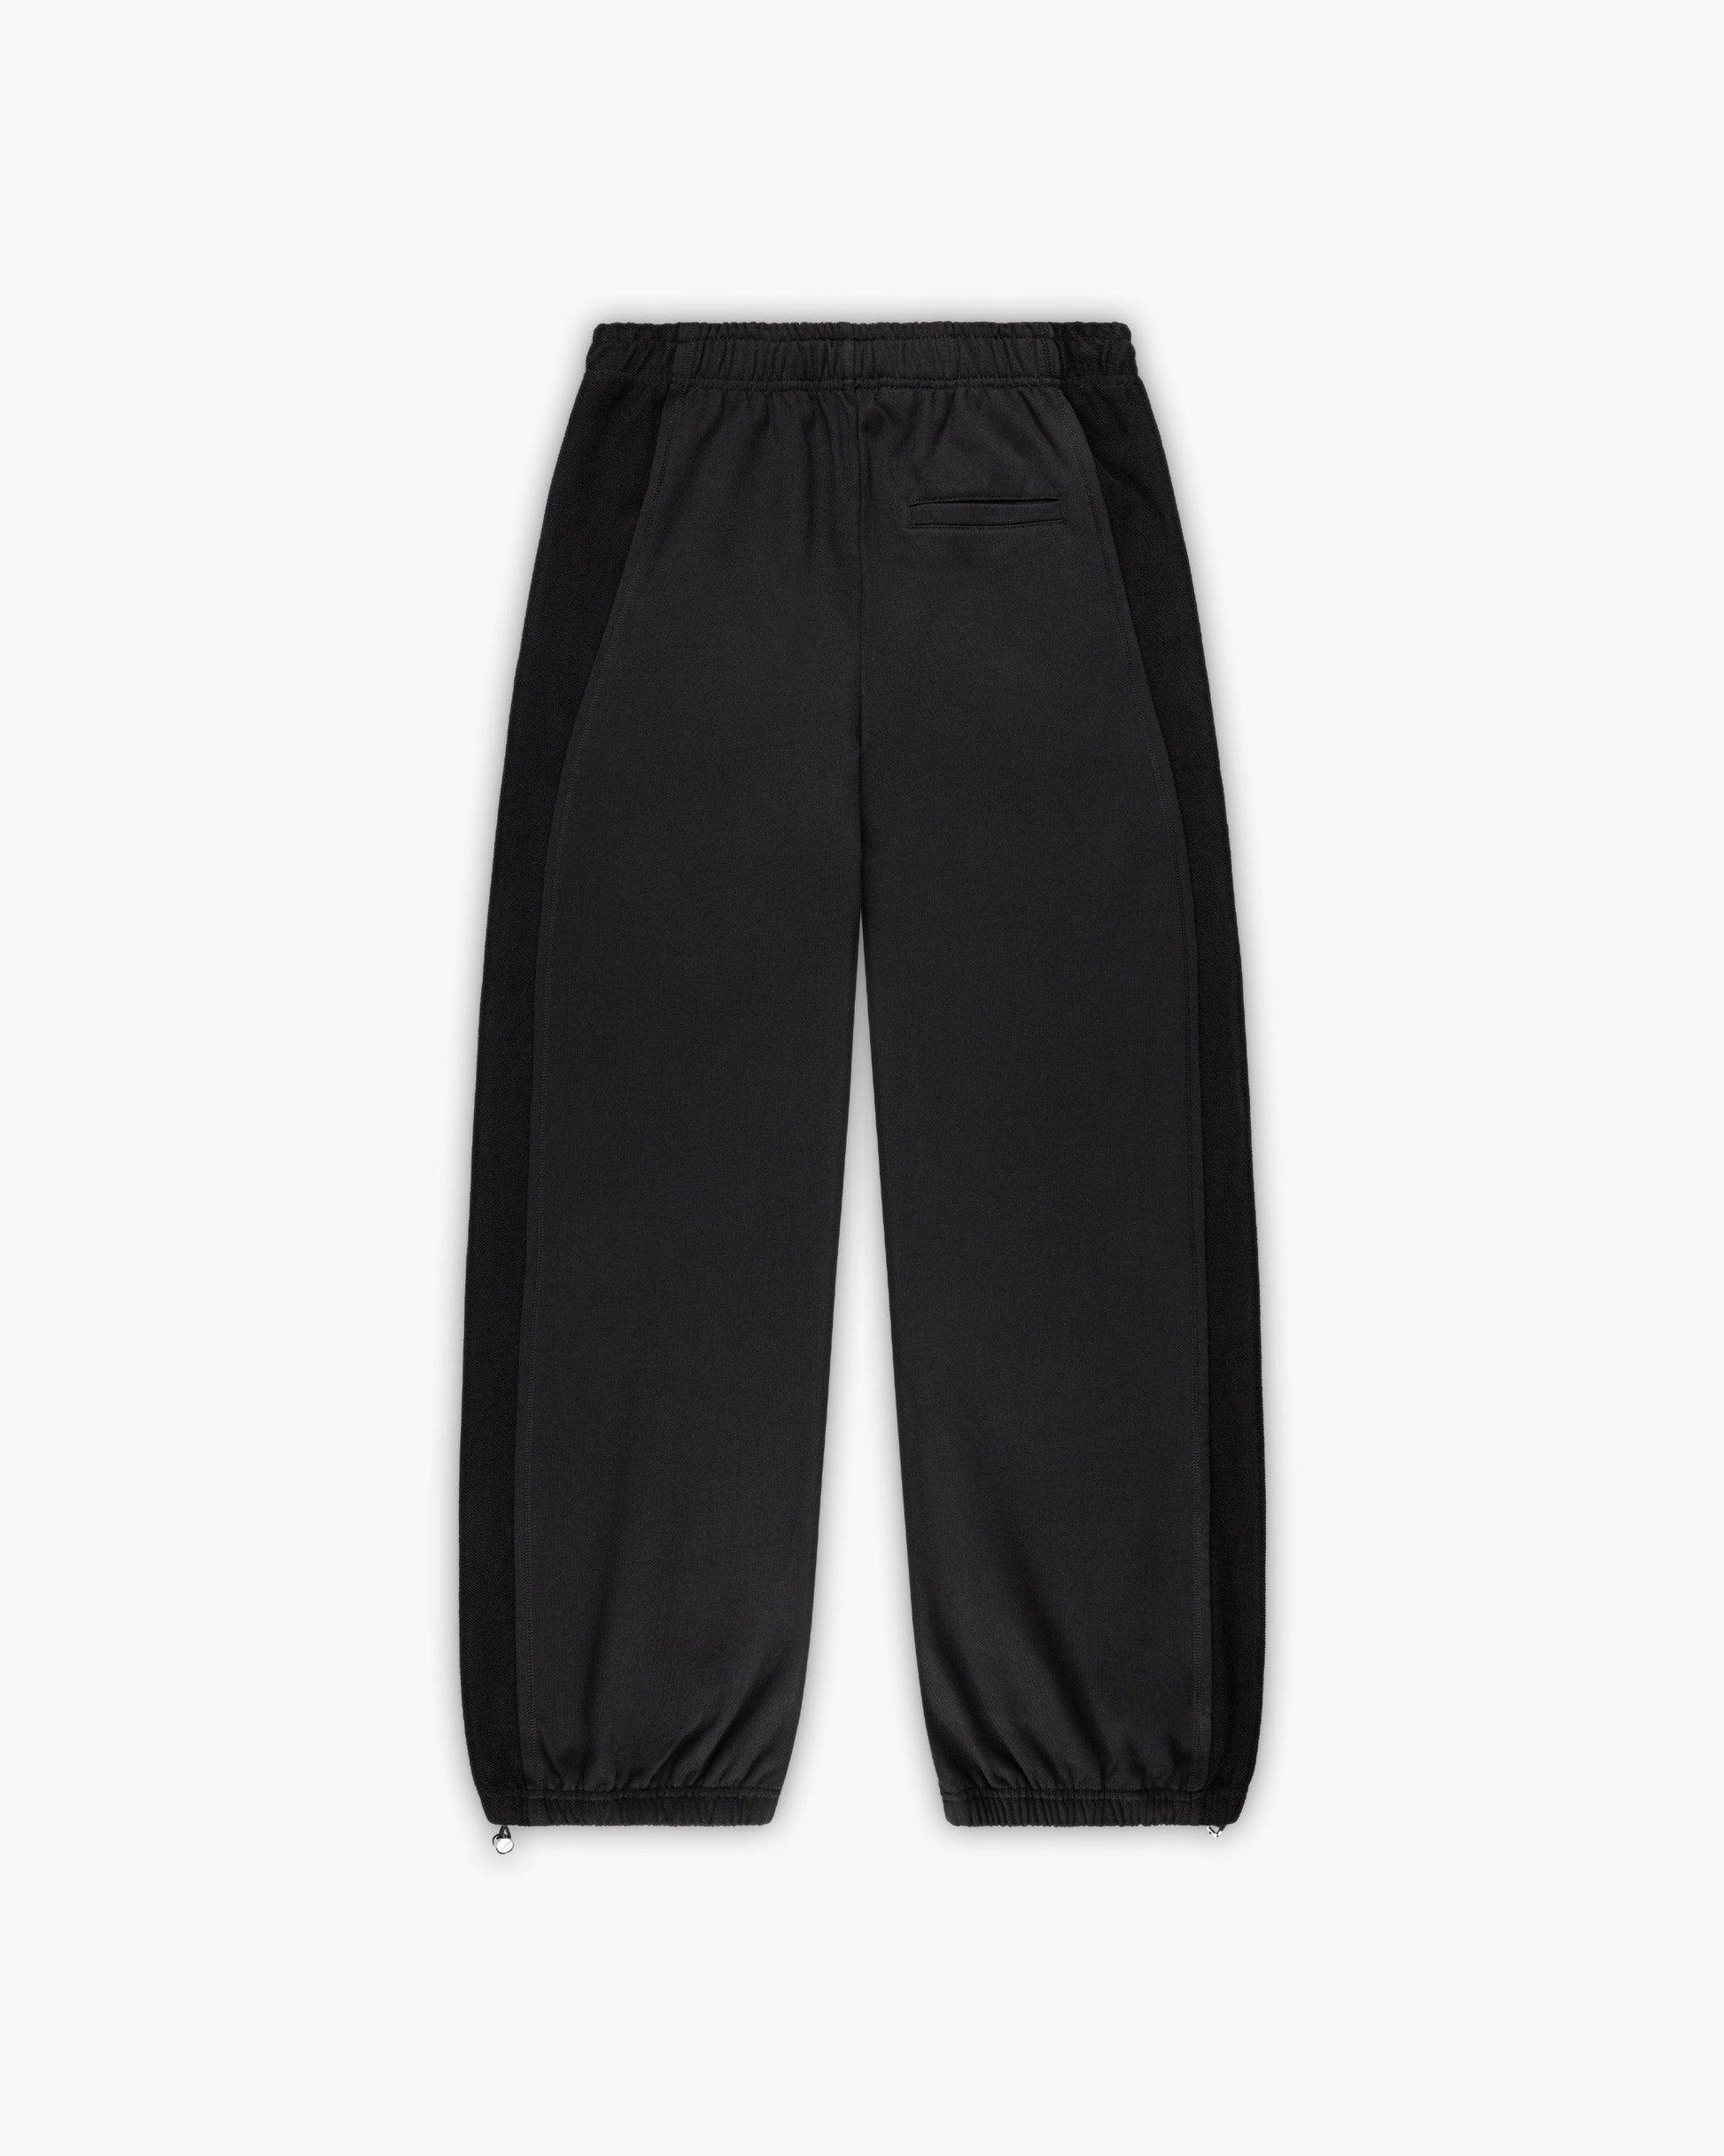 INSIDE OUT JOGGER BLACK - VICINITY